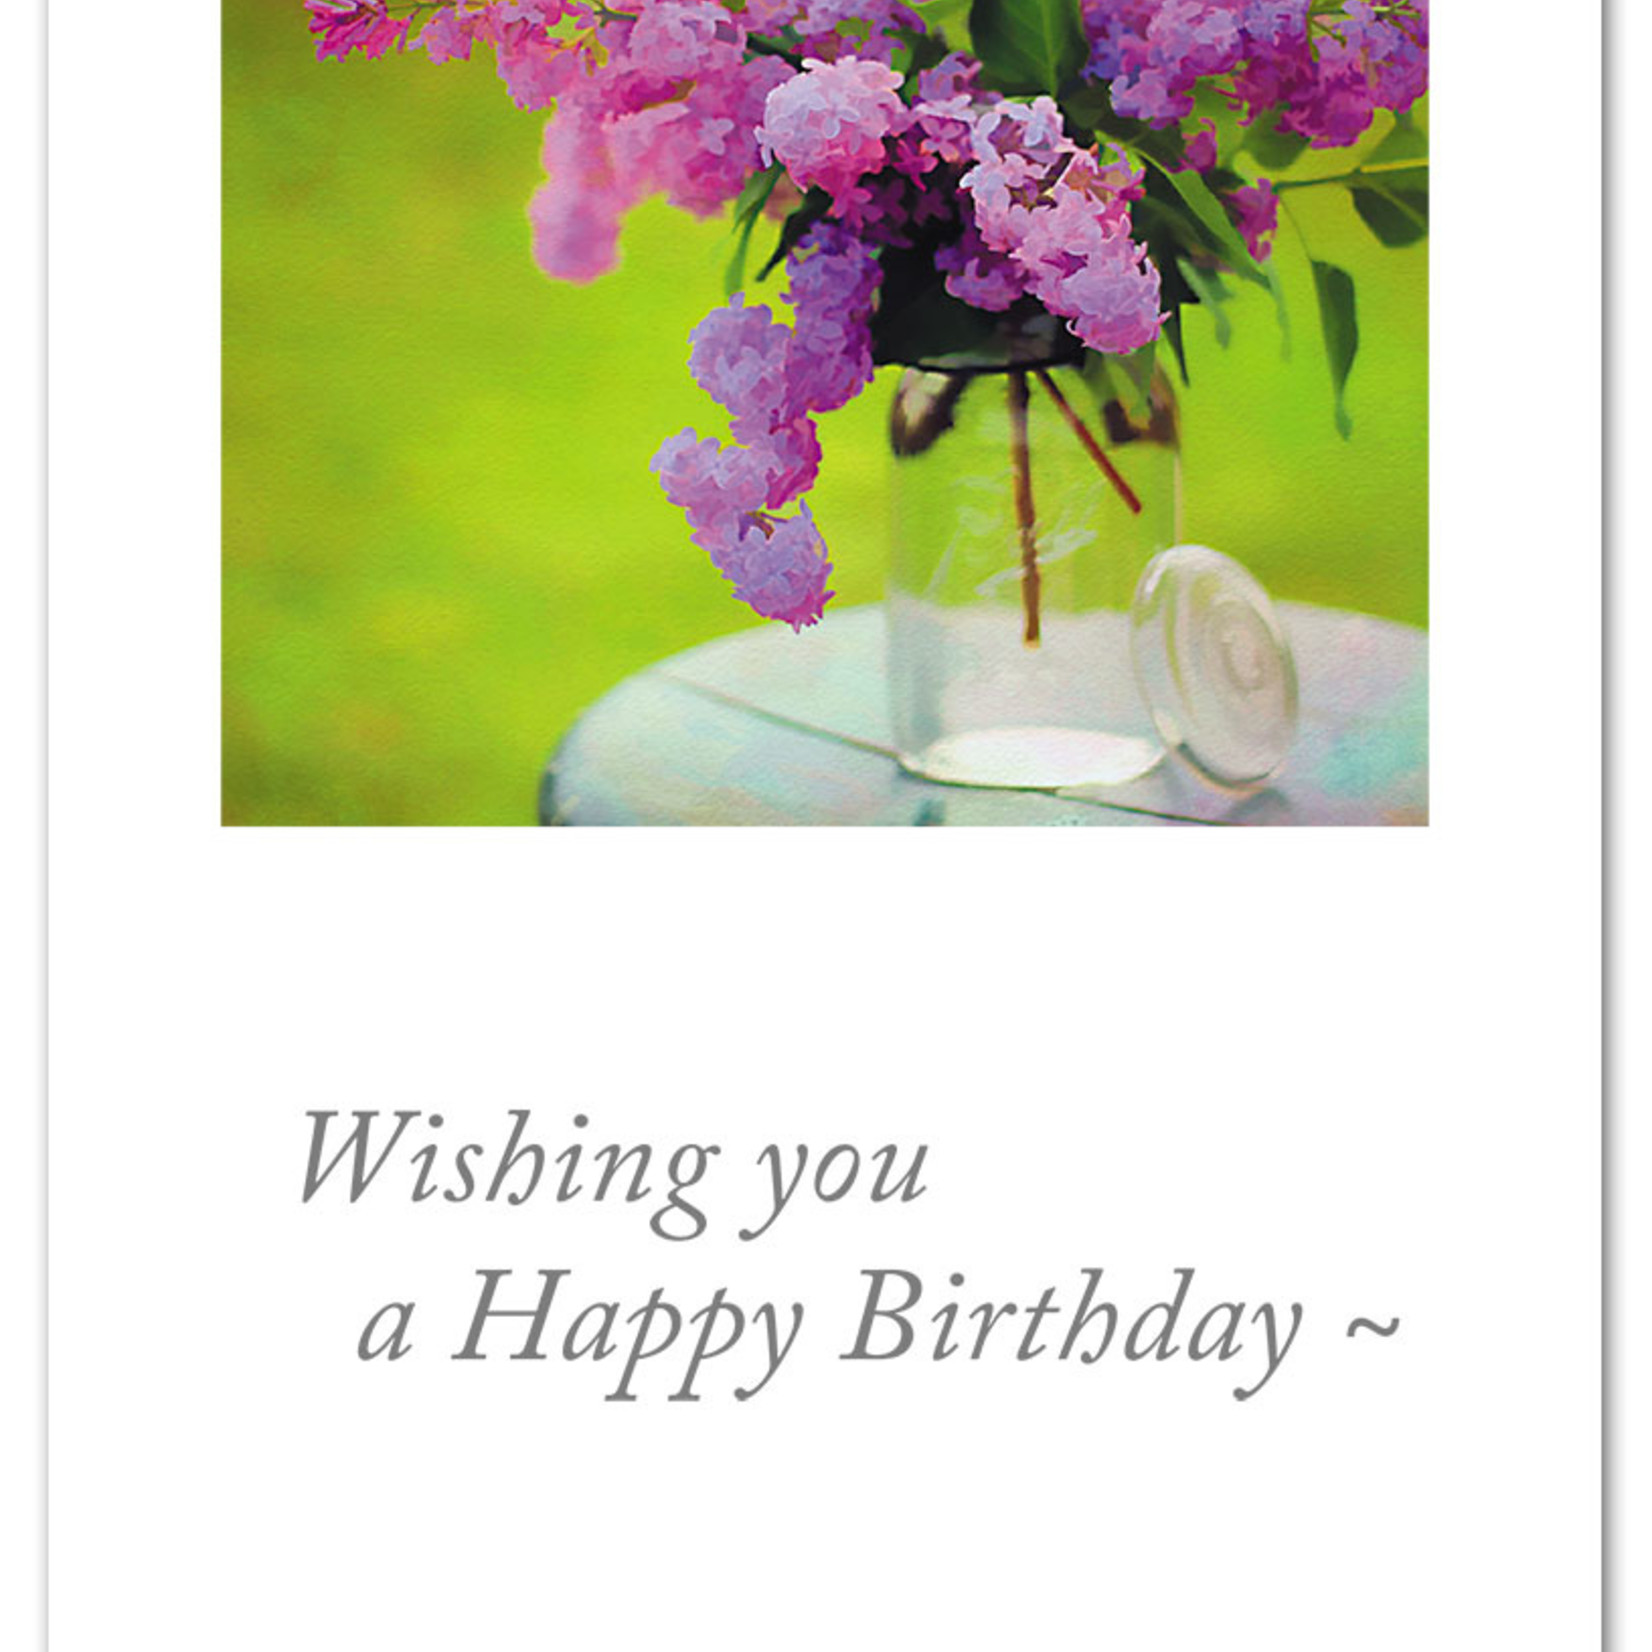 Cardthartic Cardthartic - Wishing You a Happy Birthday Flowers Card